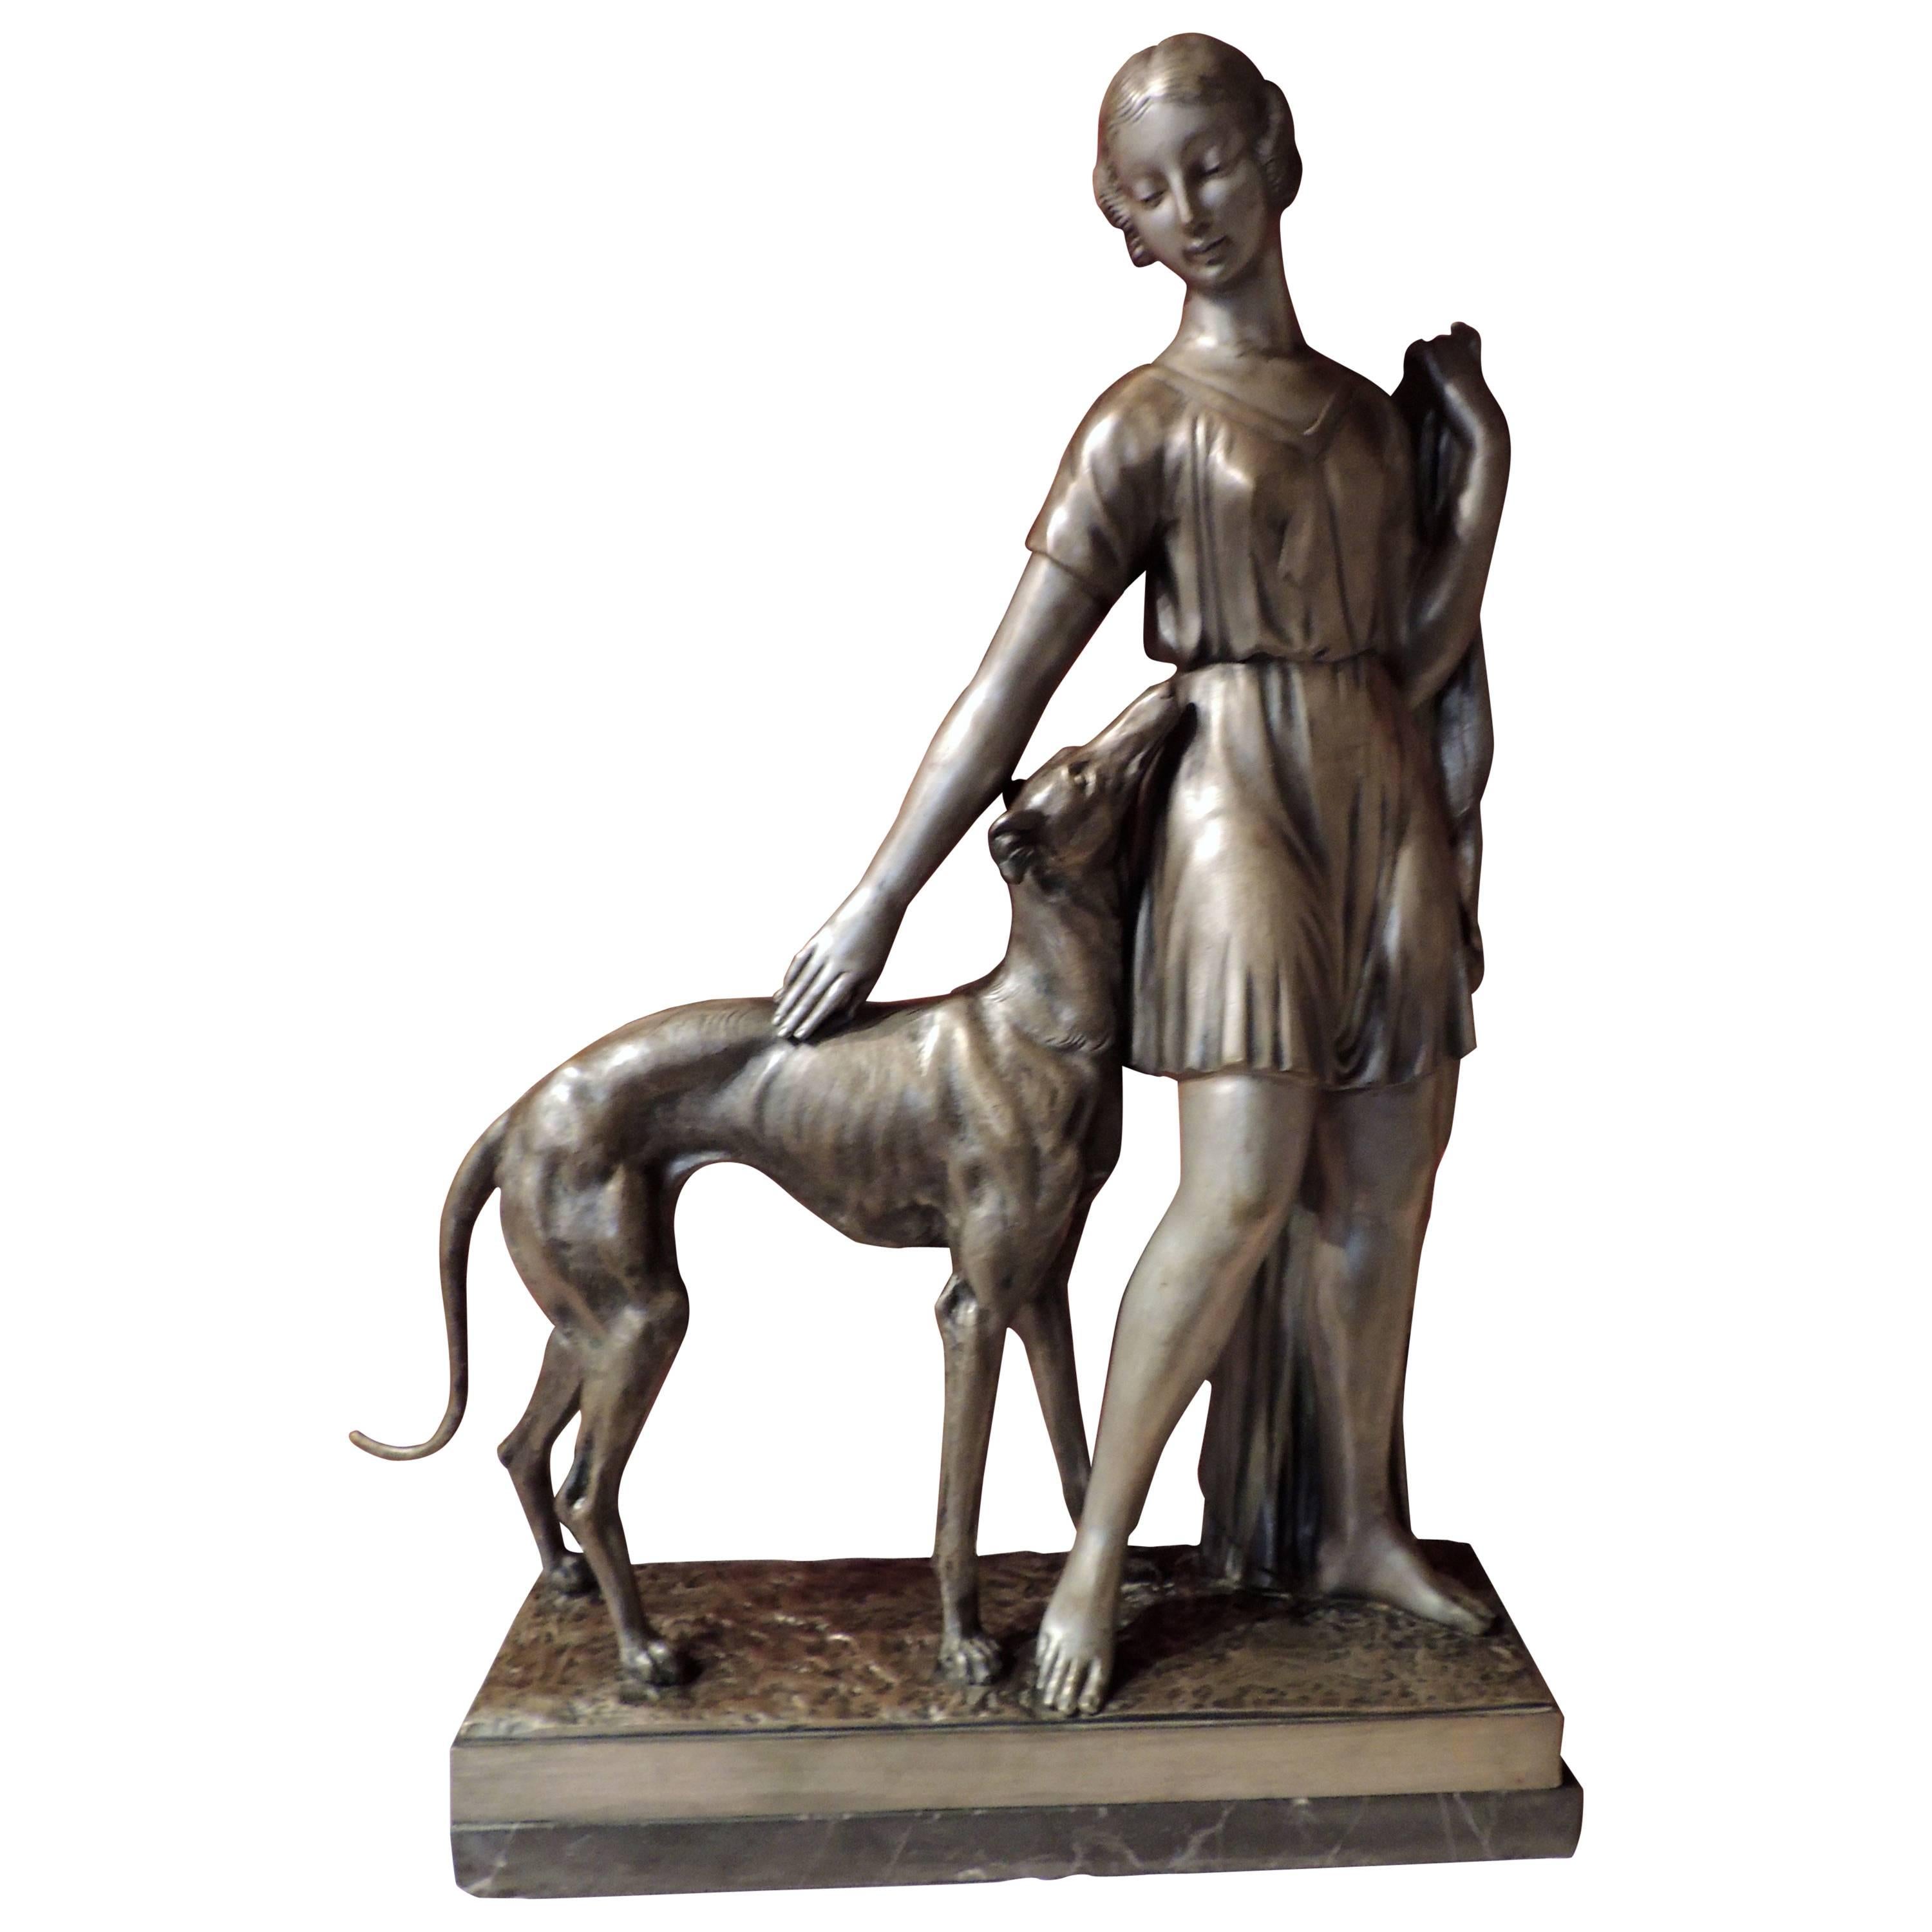 Grand Art Deco Bronze Sculpture of a Woman and Greyhound by I. Gallo